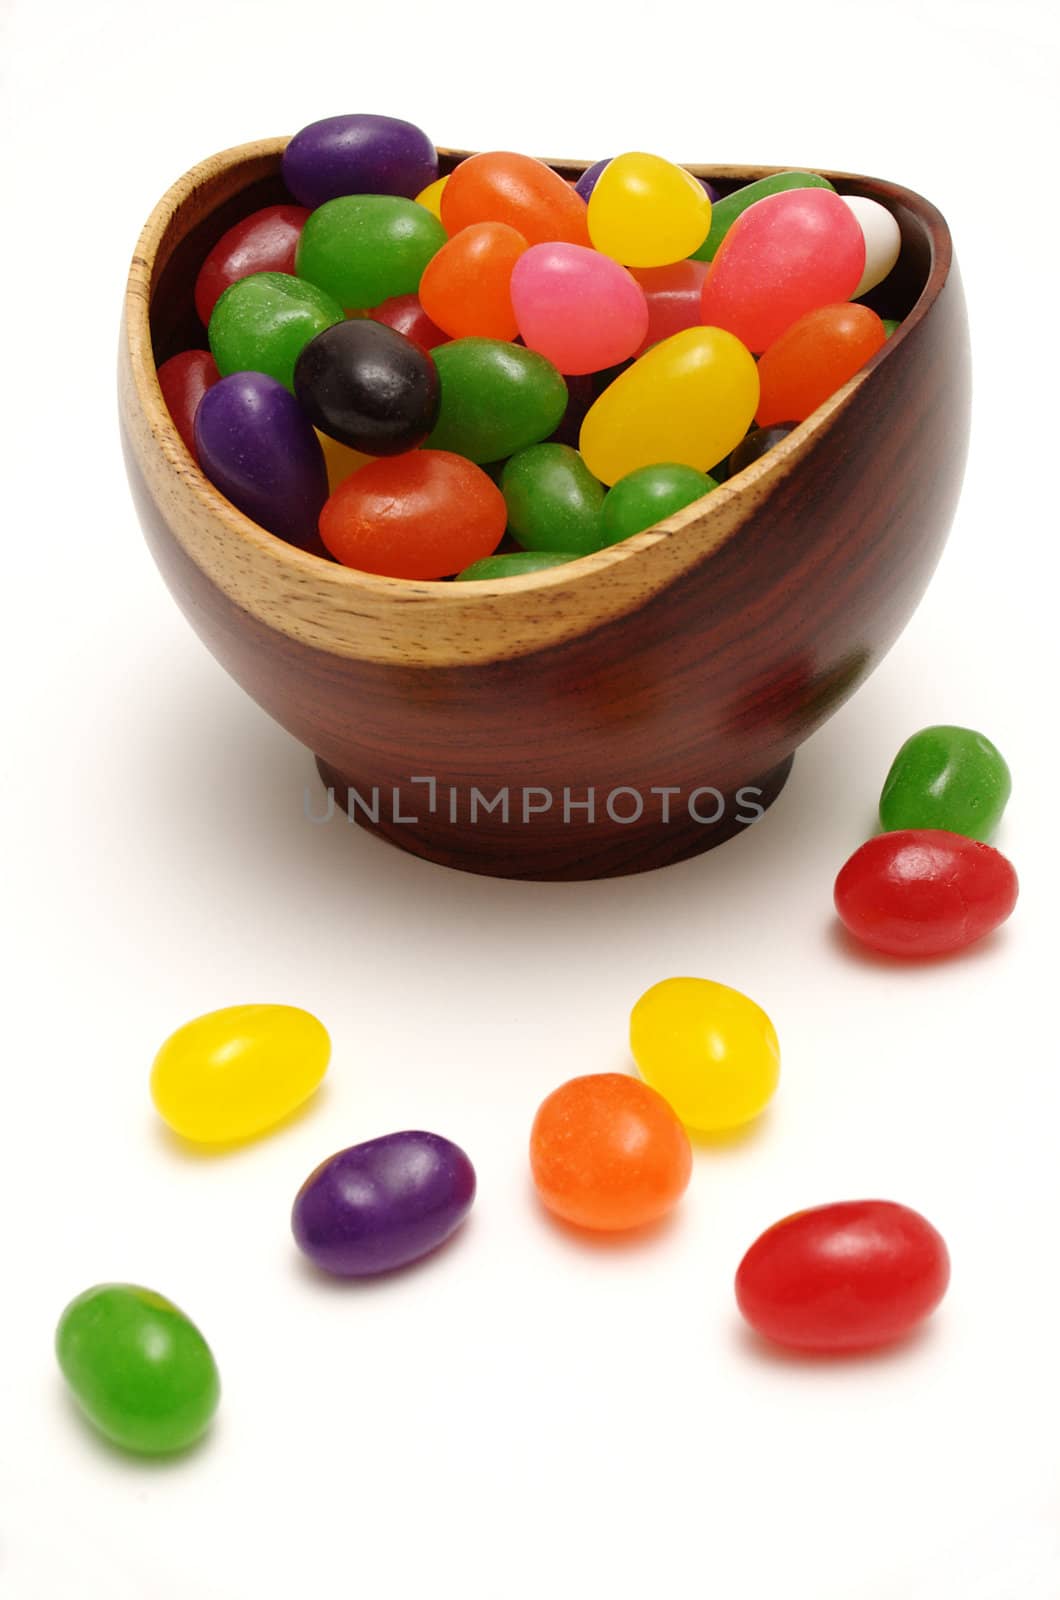 Jelly beans in a rosewood bowl by paulglover